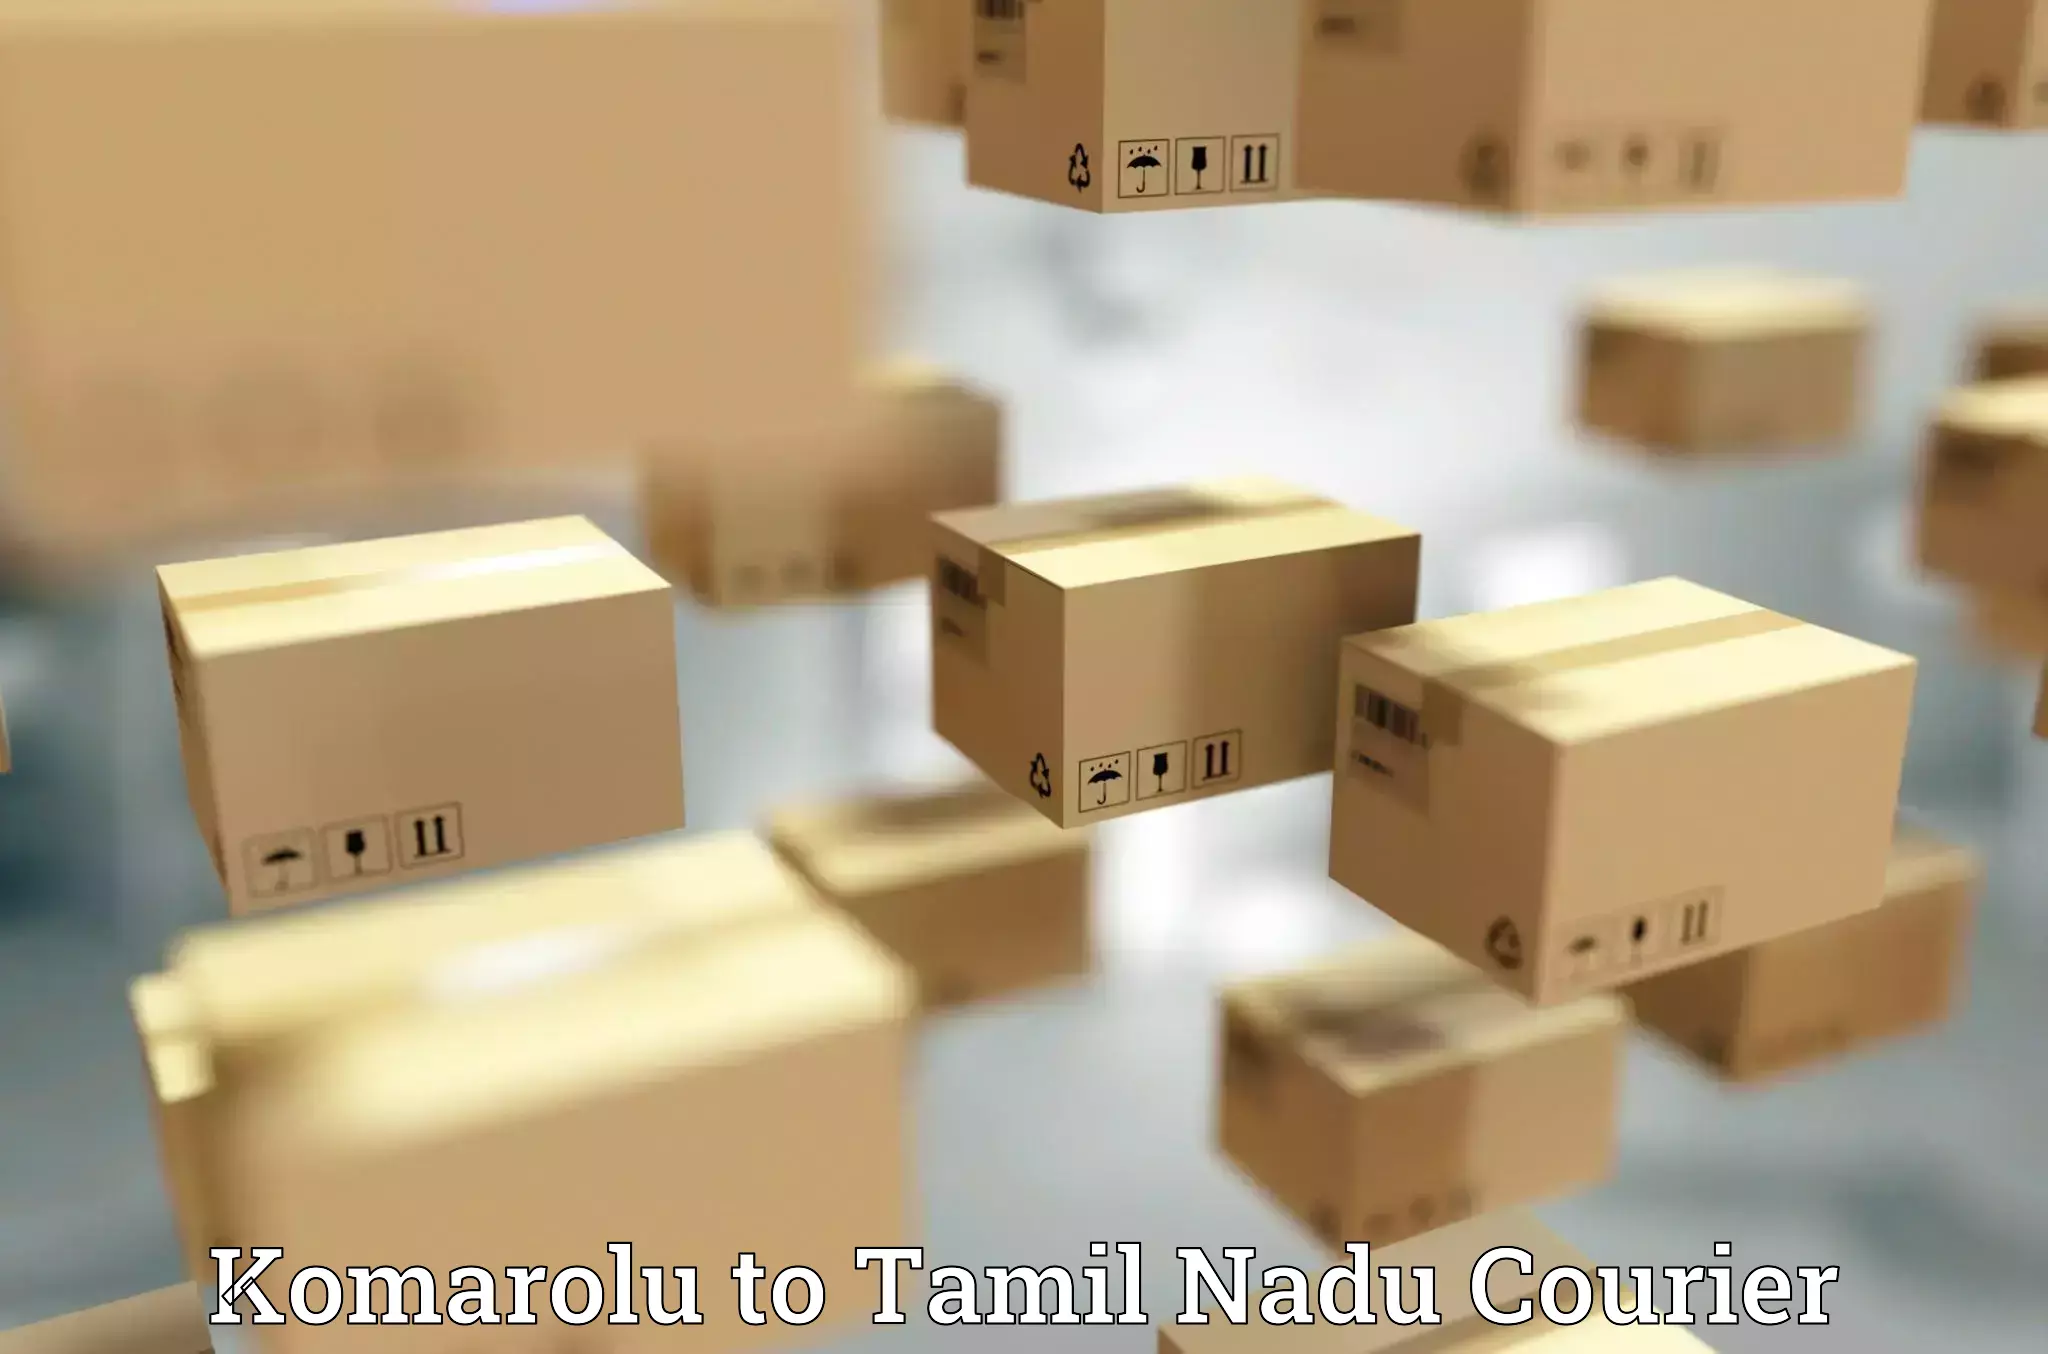 Reliable delivery network Komarolu to Thisayanvilai